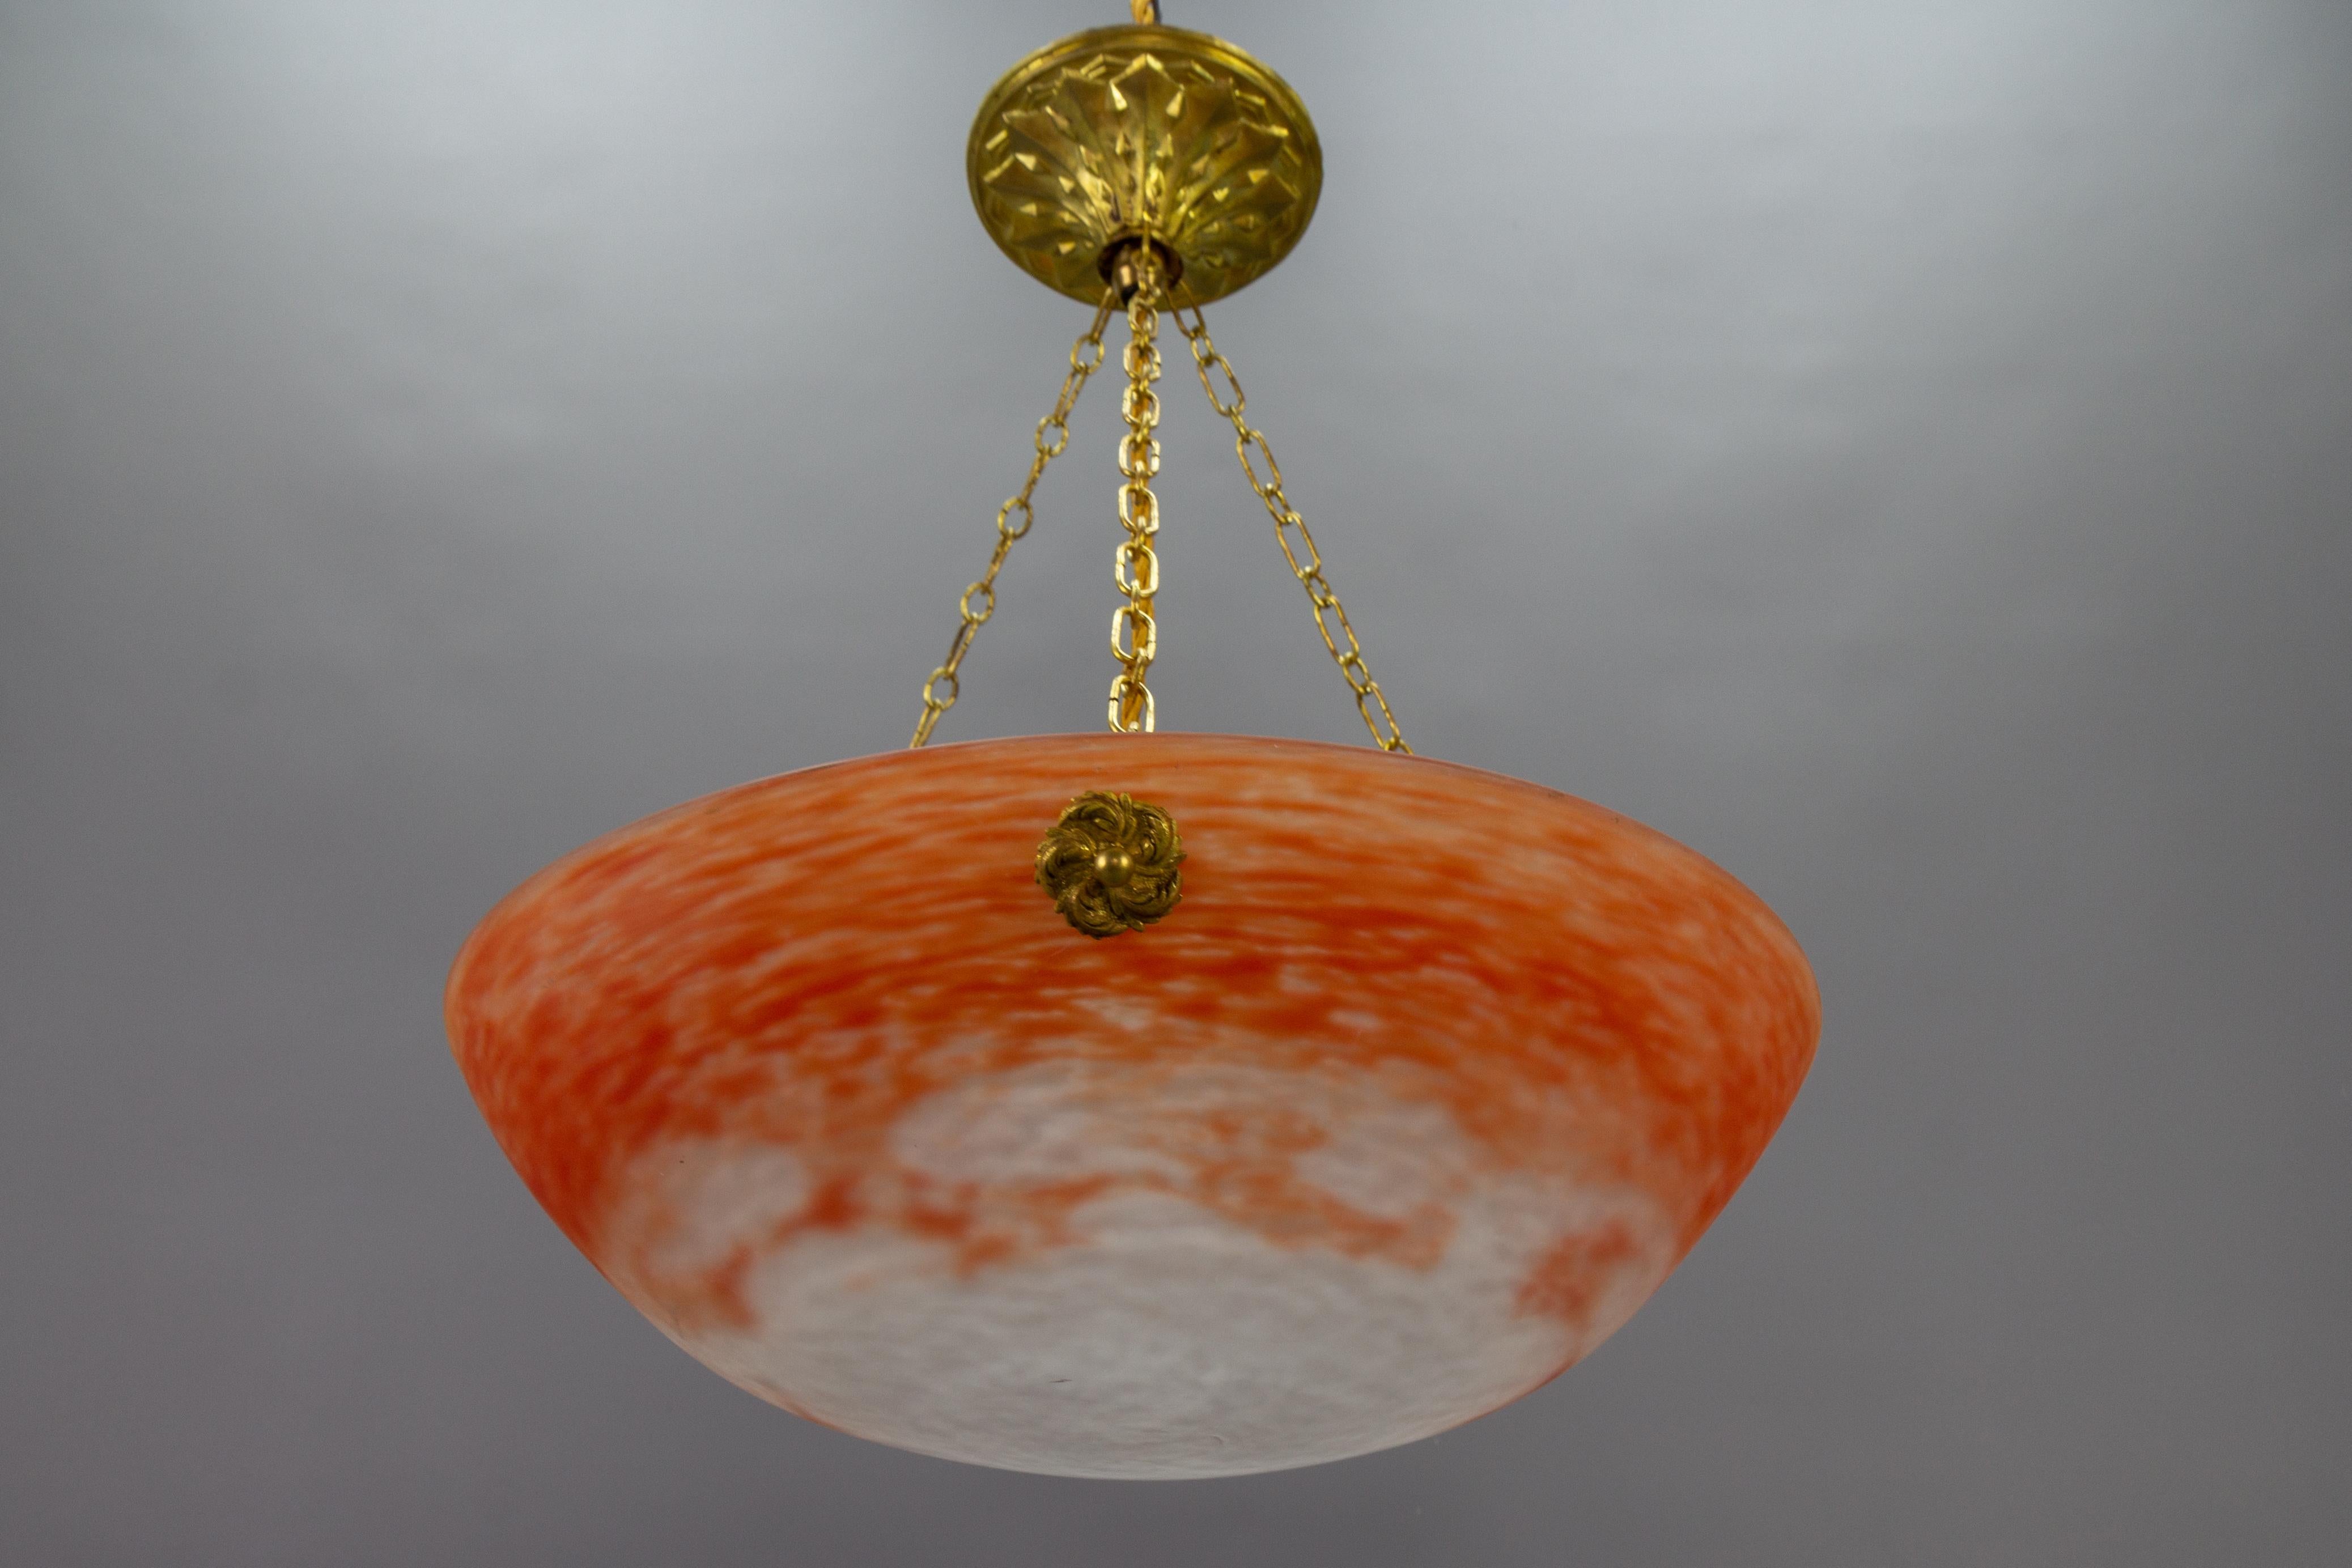 French Art Nouveau Orange and White Glass Pendant Light Signed Noverdy, 1920s For Sale 6